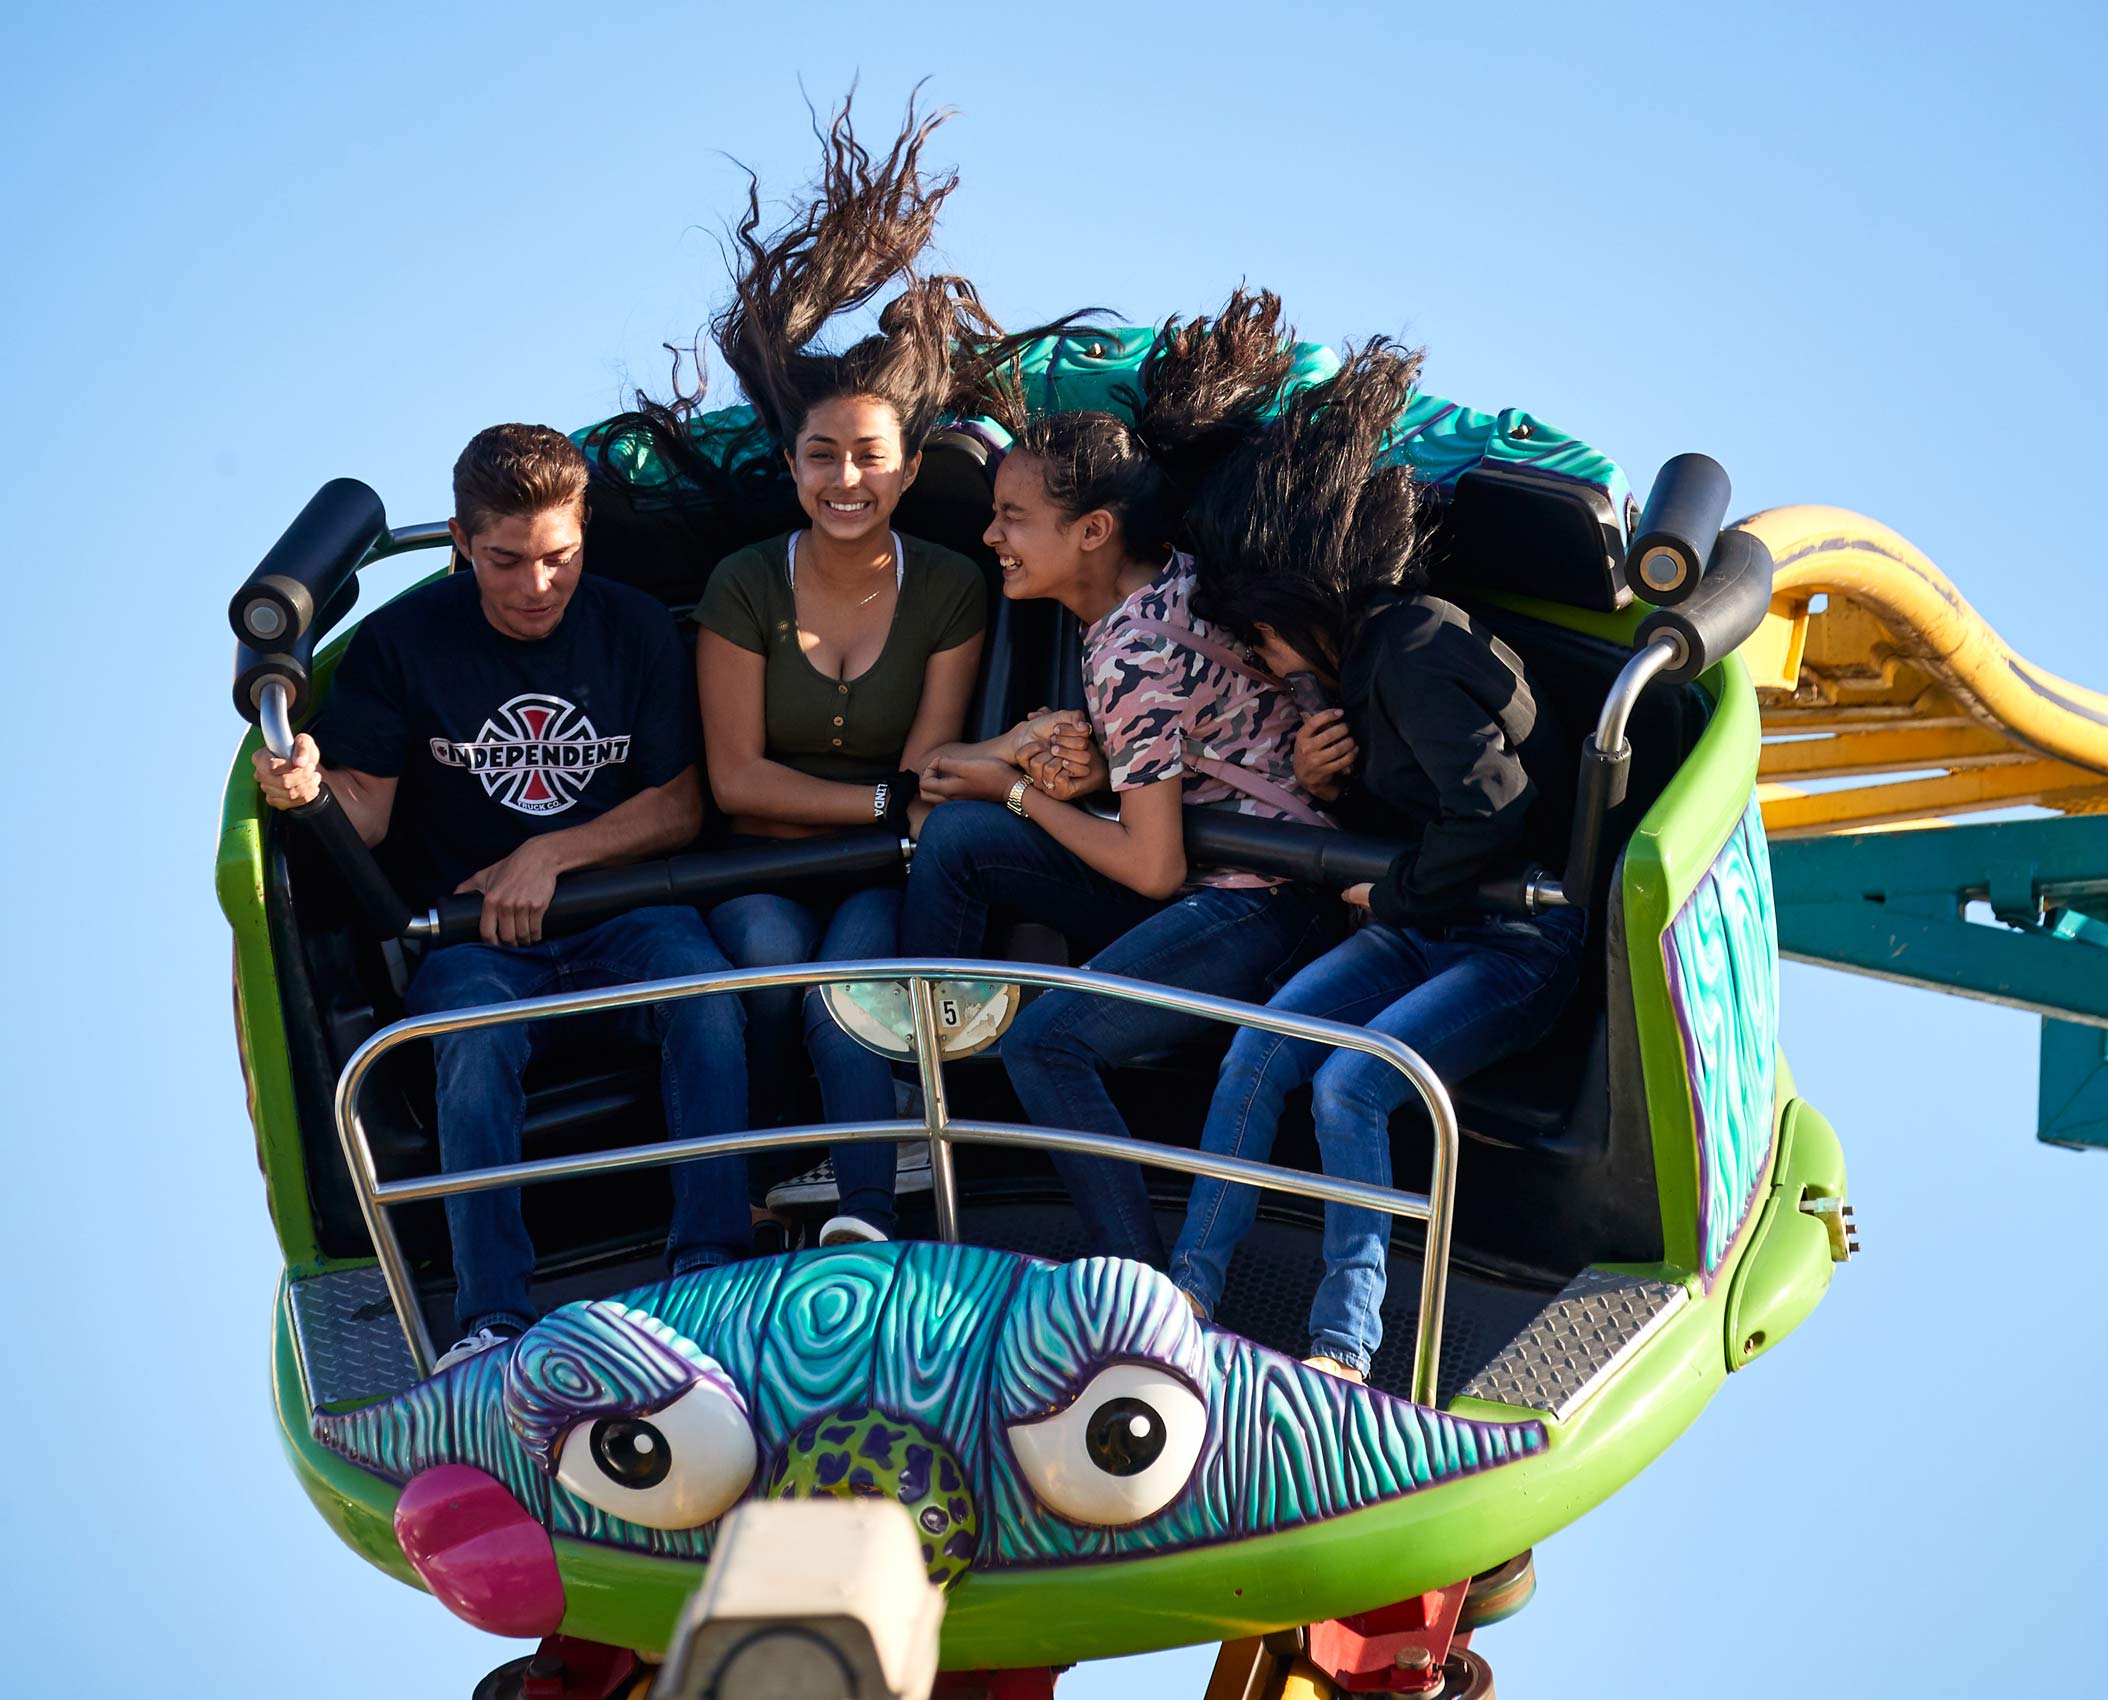 Fearful Roller Coaster Riders